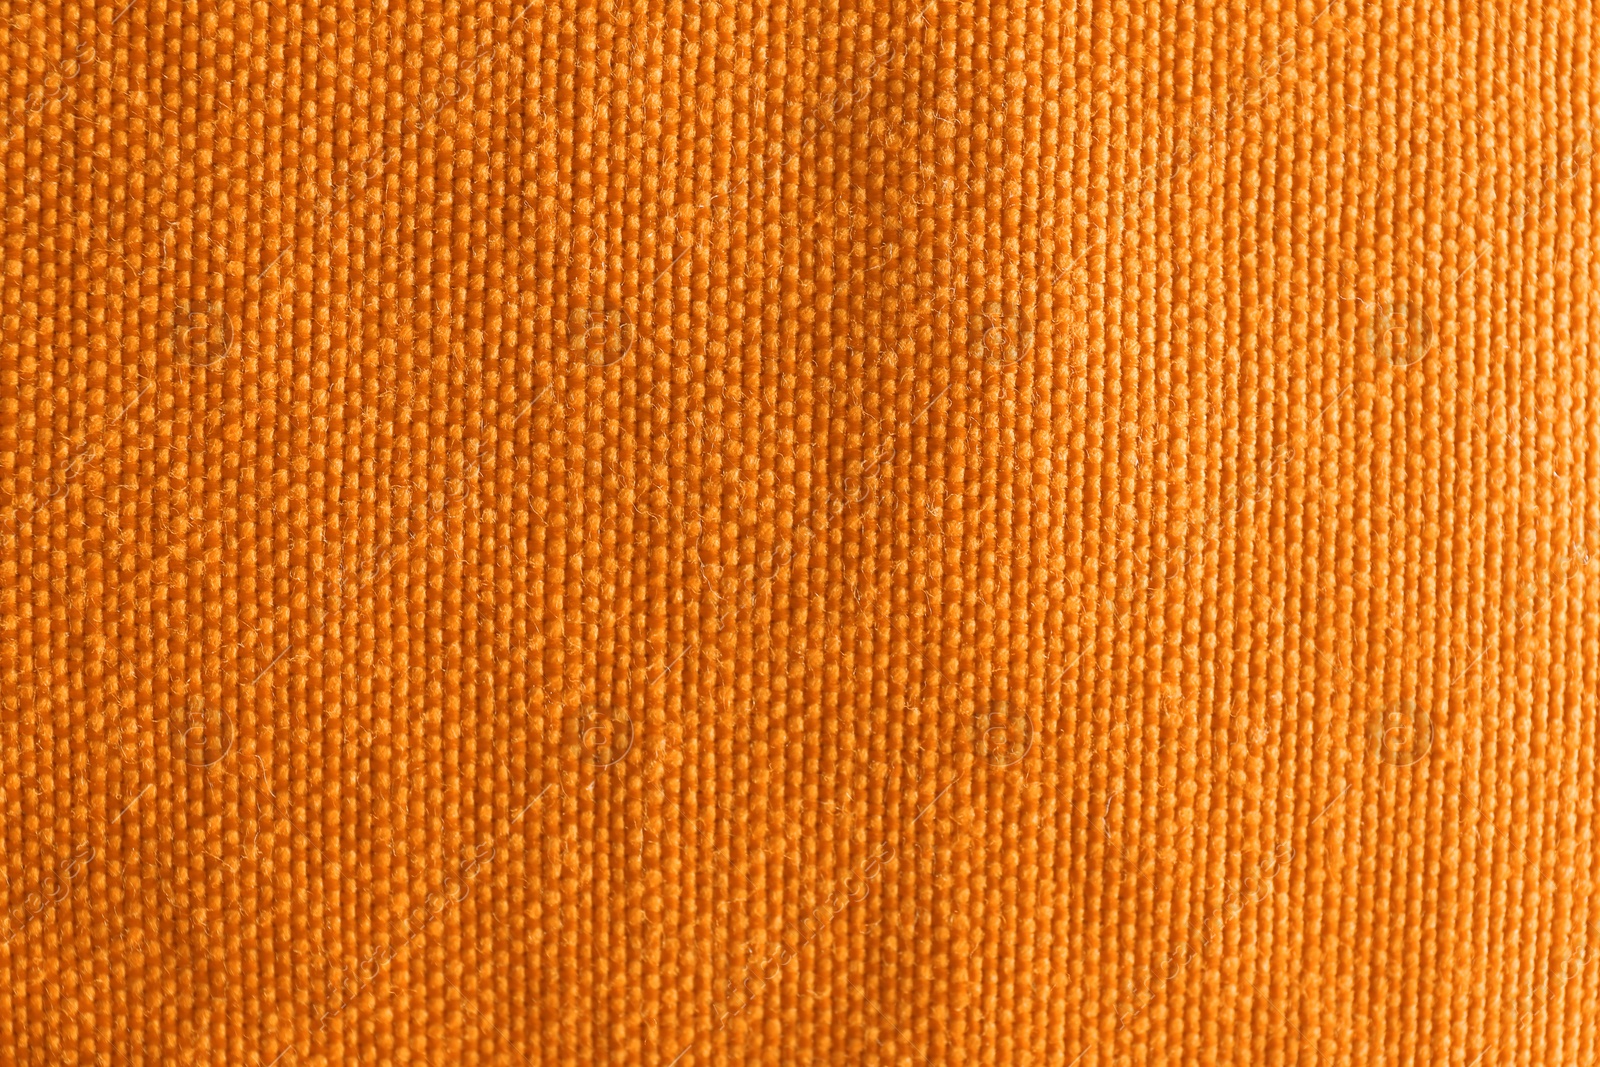 Photo of Orange textured fabric as background, top view